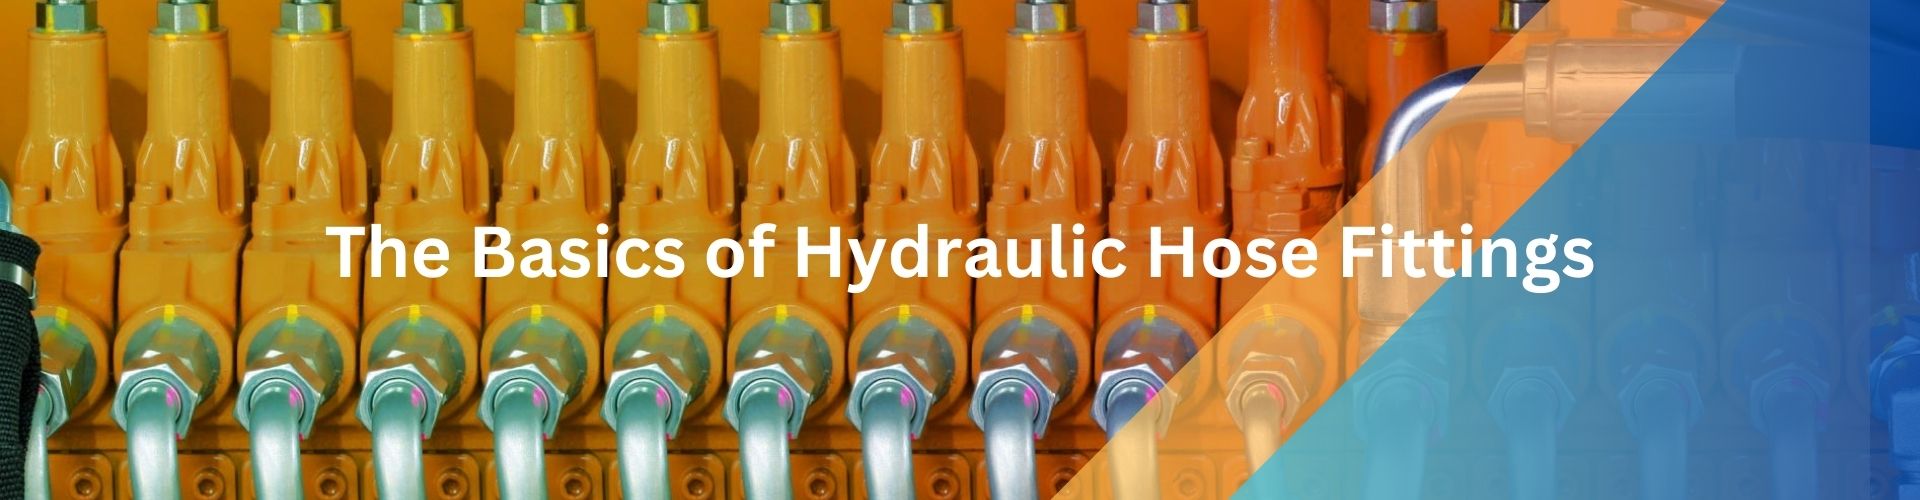 The Basic of Hydraulic Hose Fittings